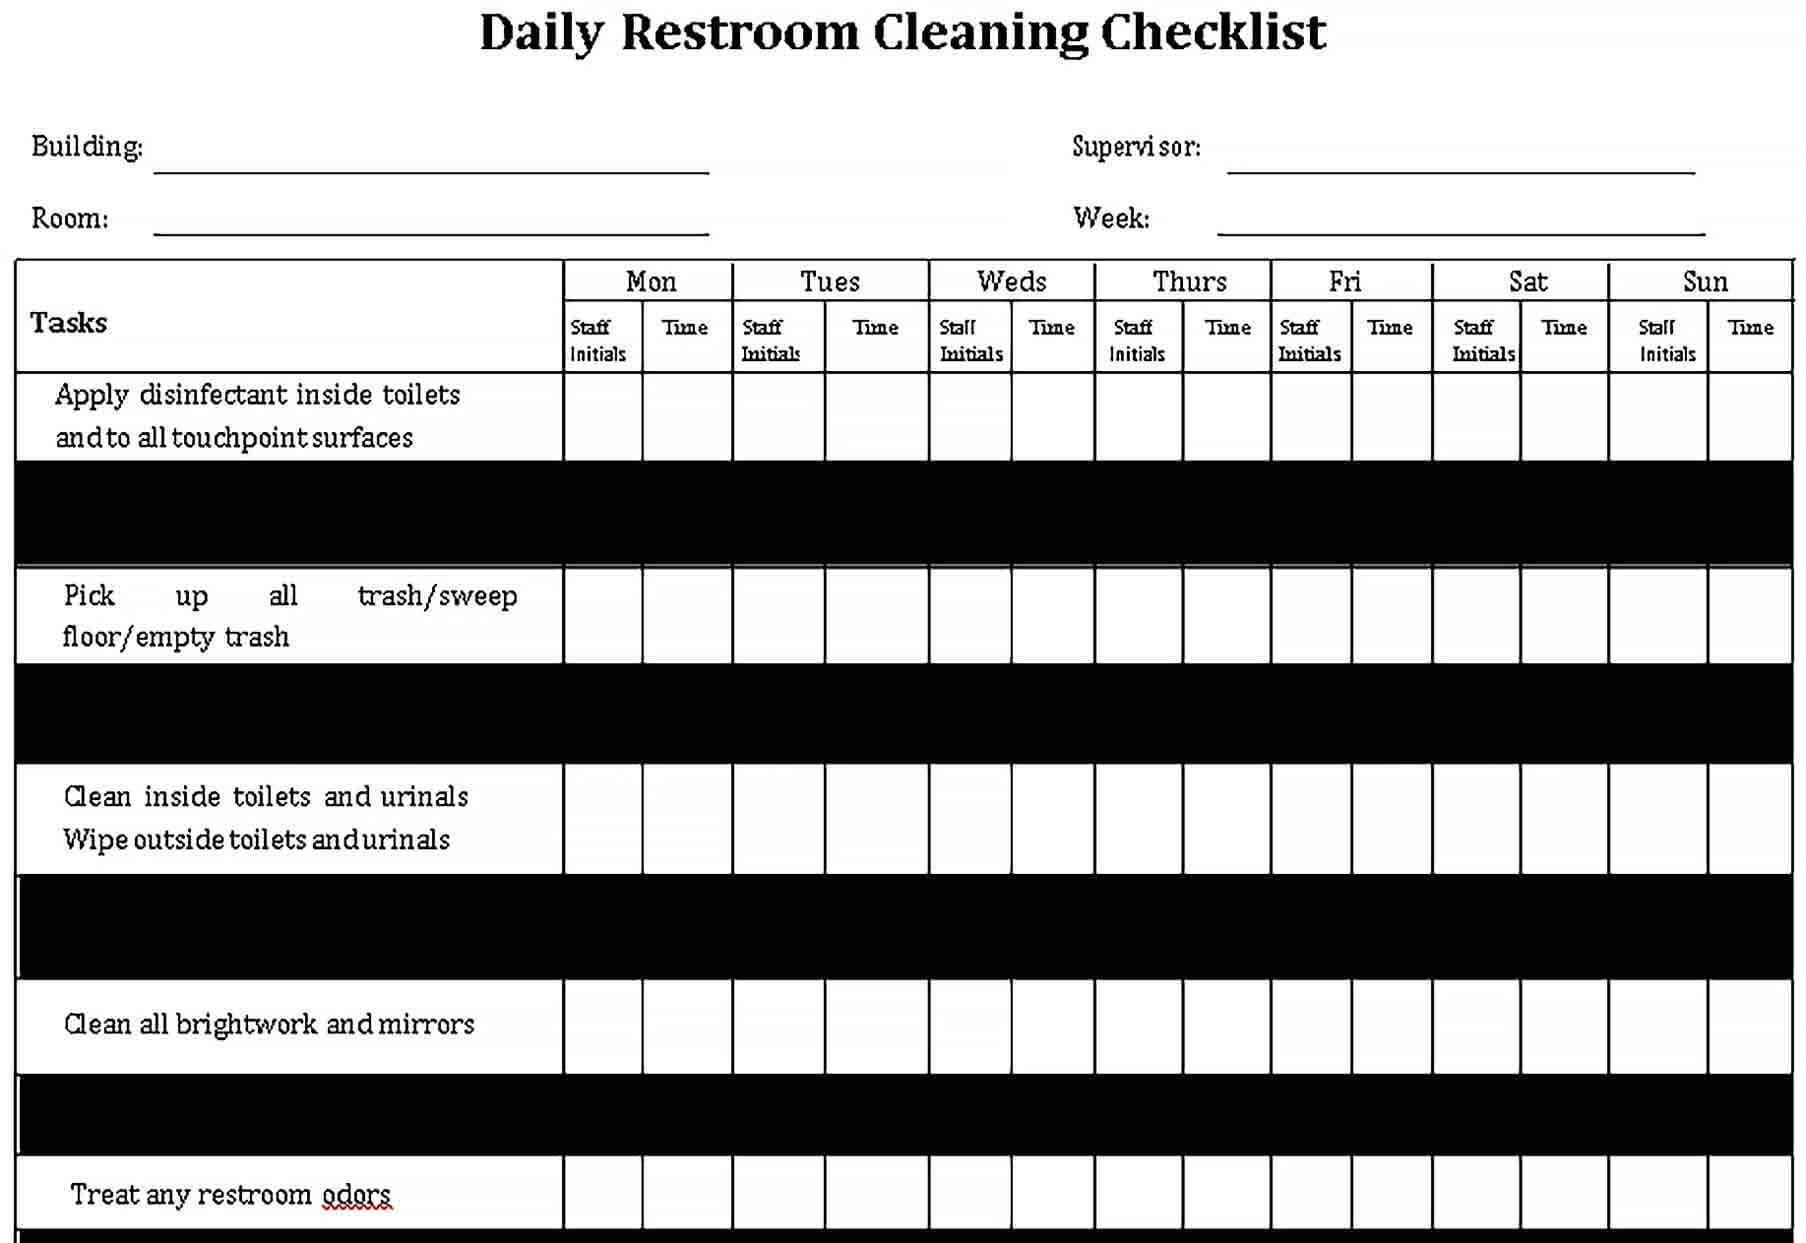 Sample Basic Daily Restroom Cleaning Checklist